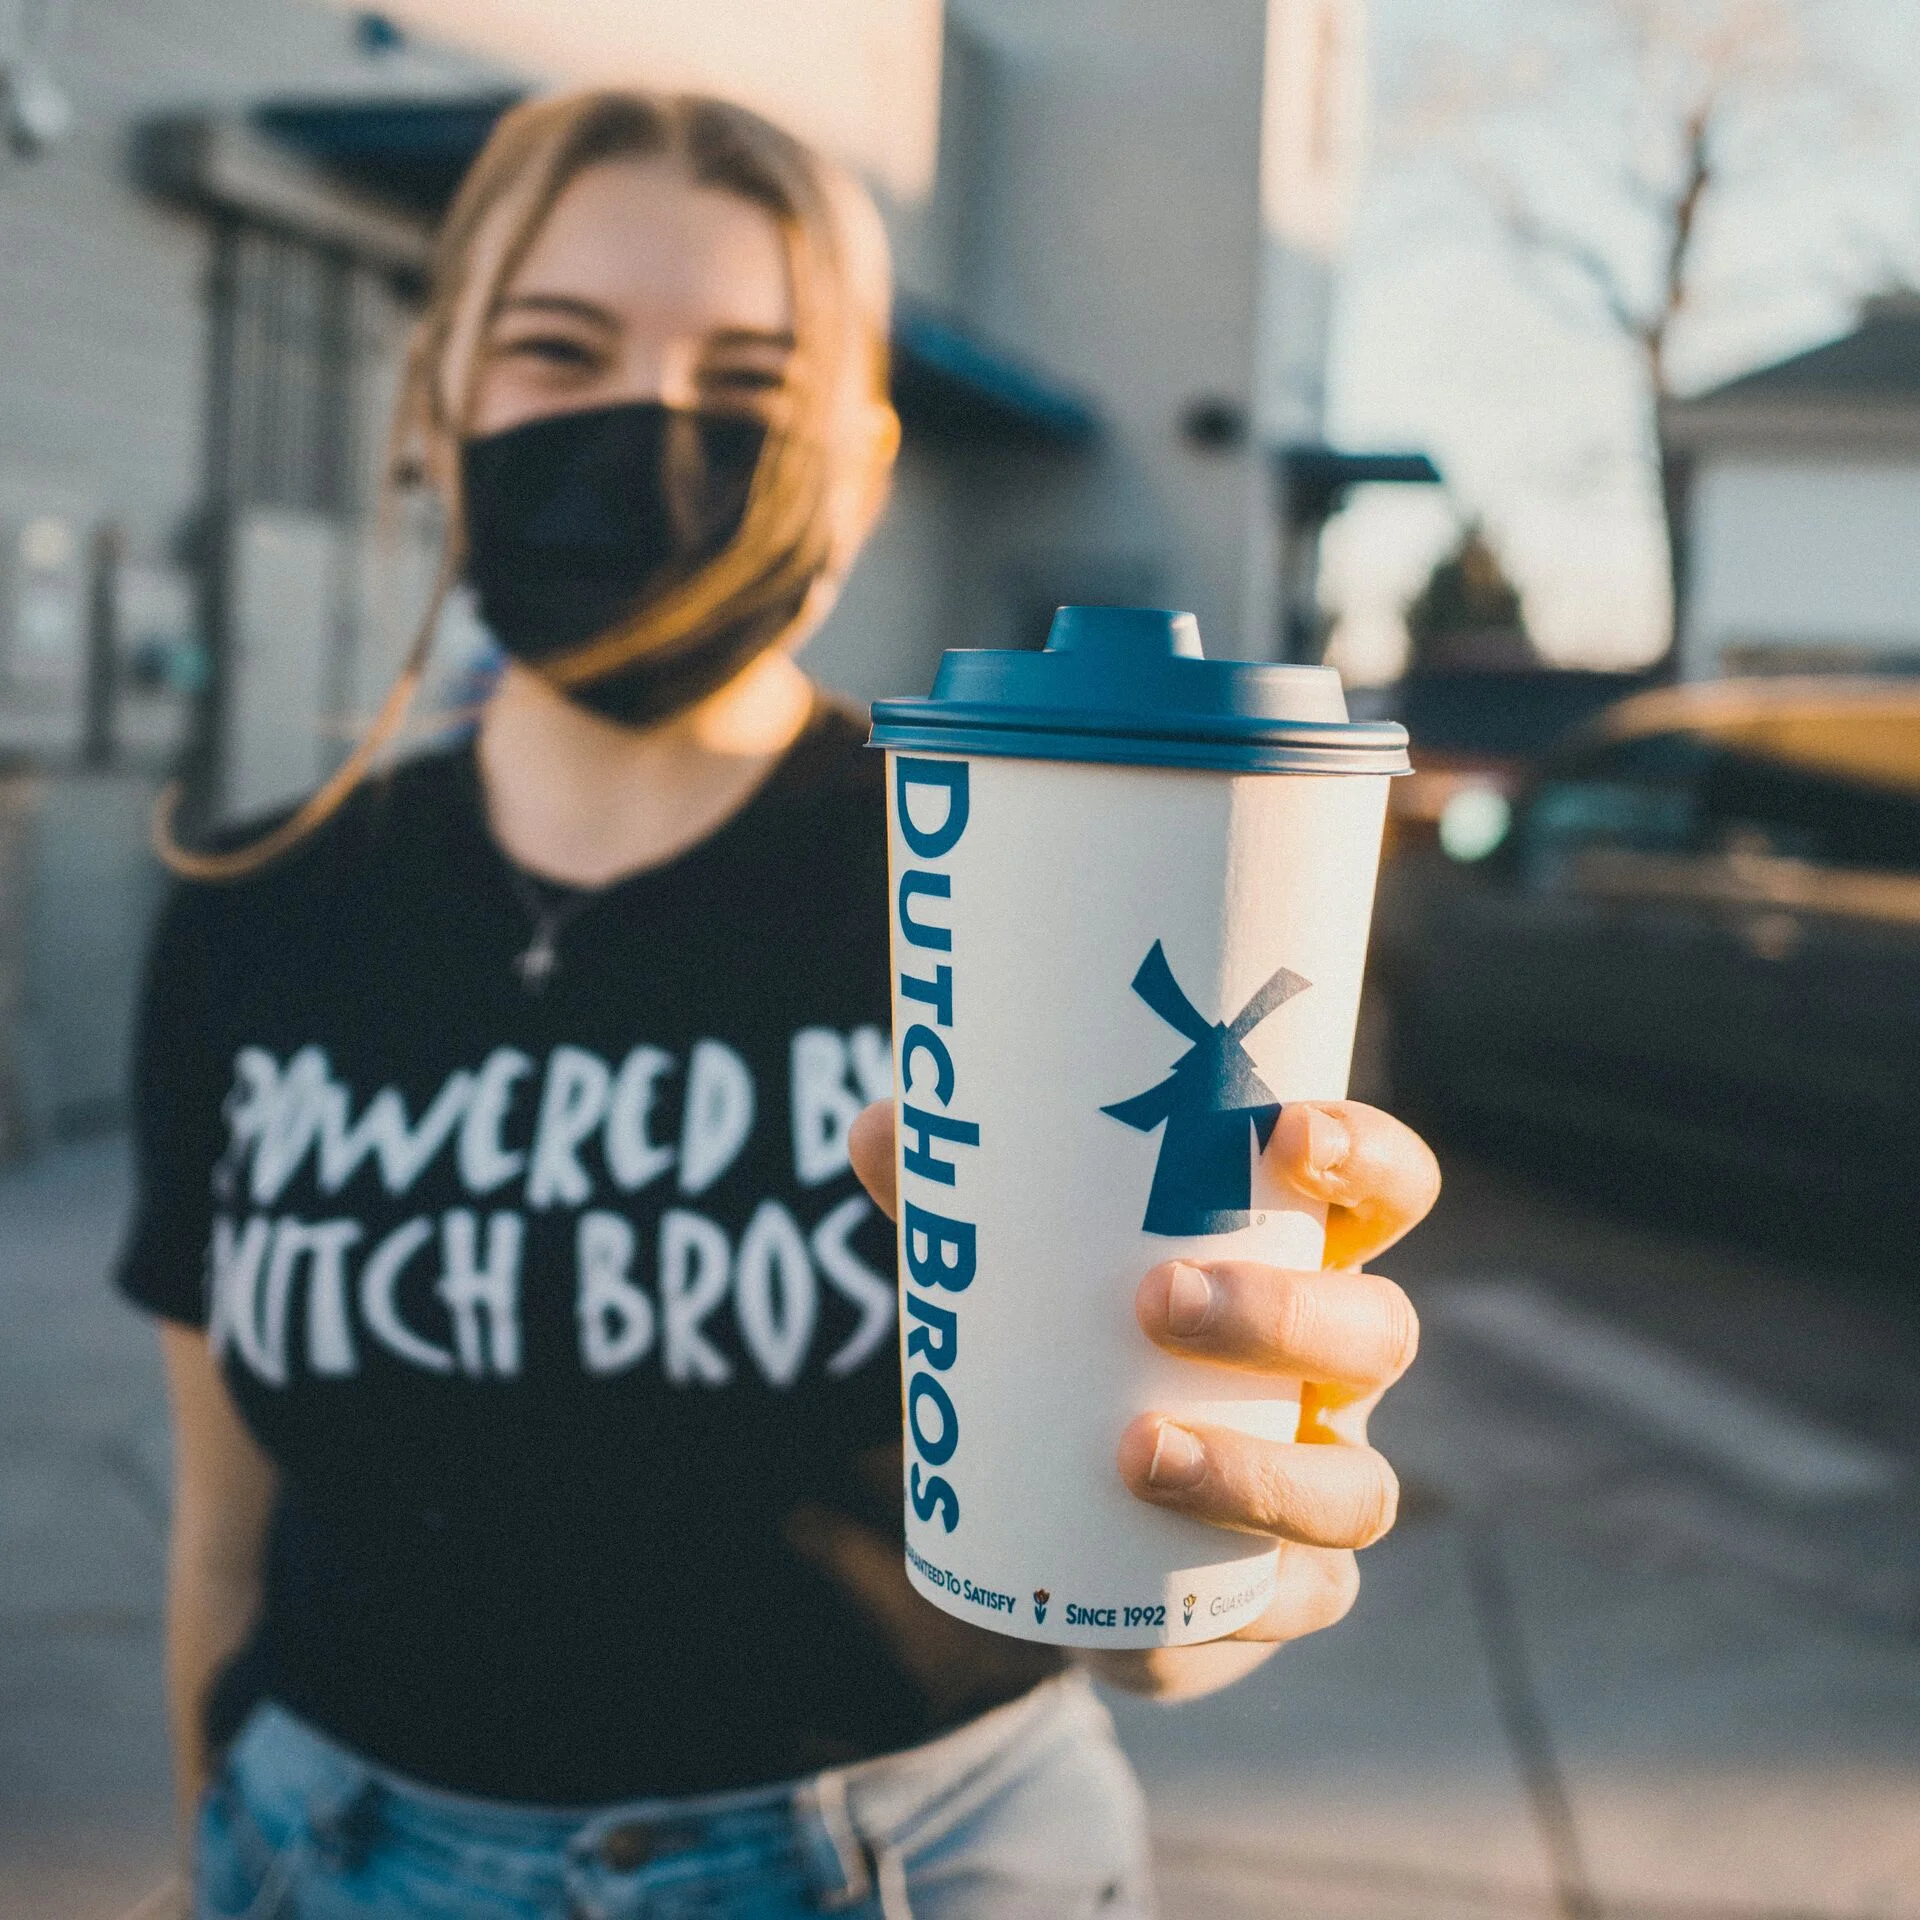 Dutch Bros full menu details and how to order - A Cup Every Day